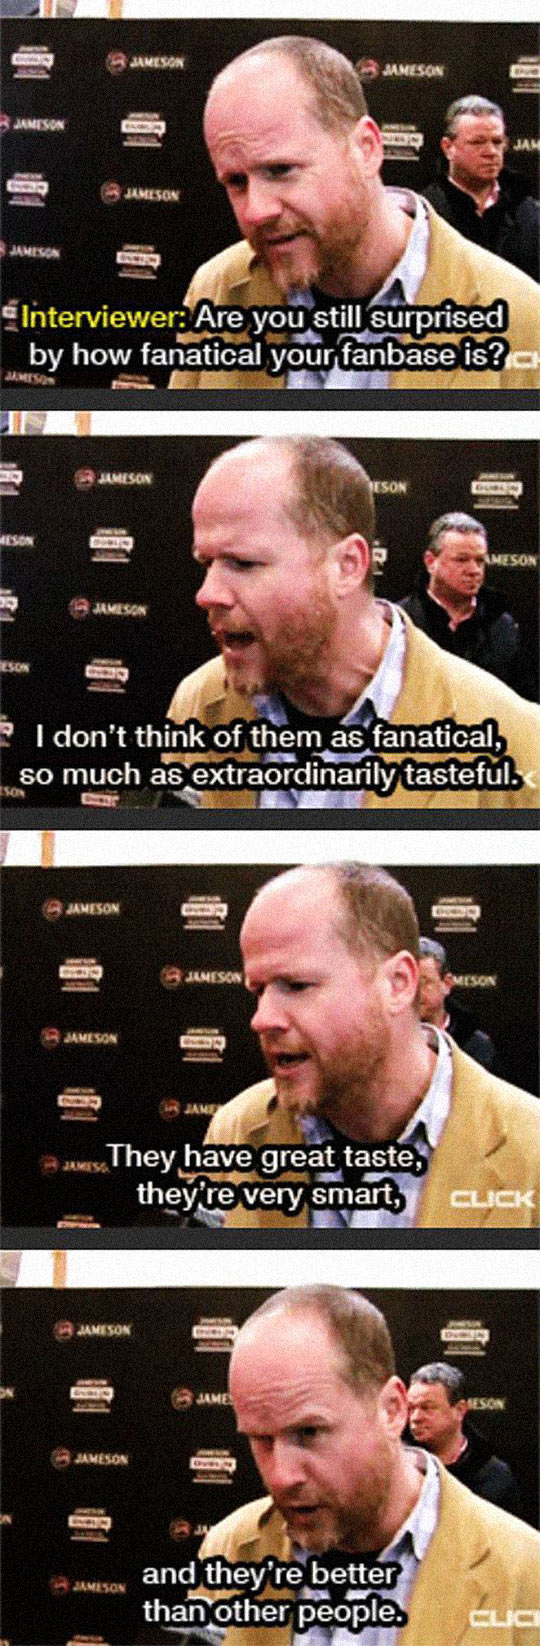 Joss Whedon's Thoughts About His Fans